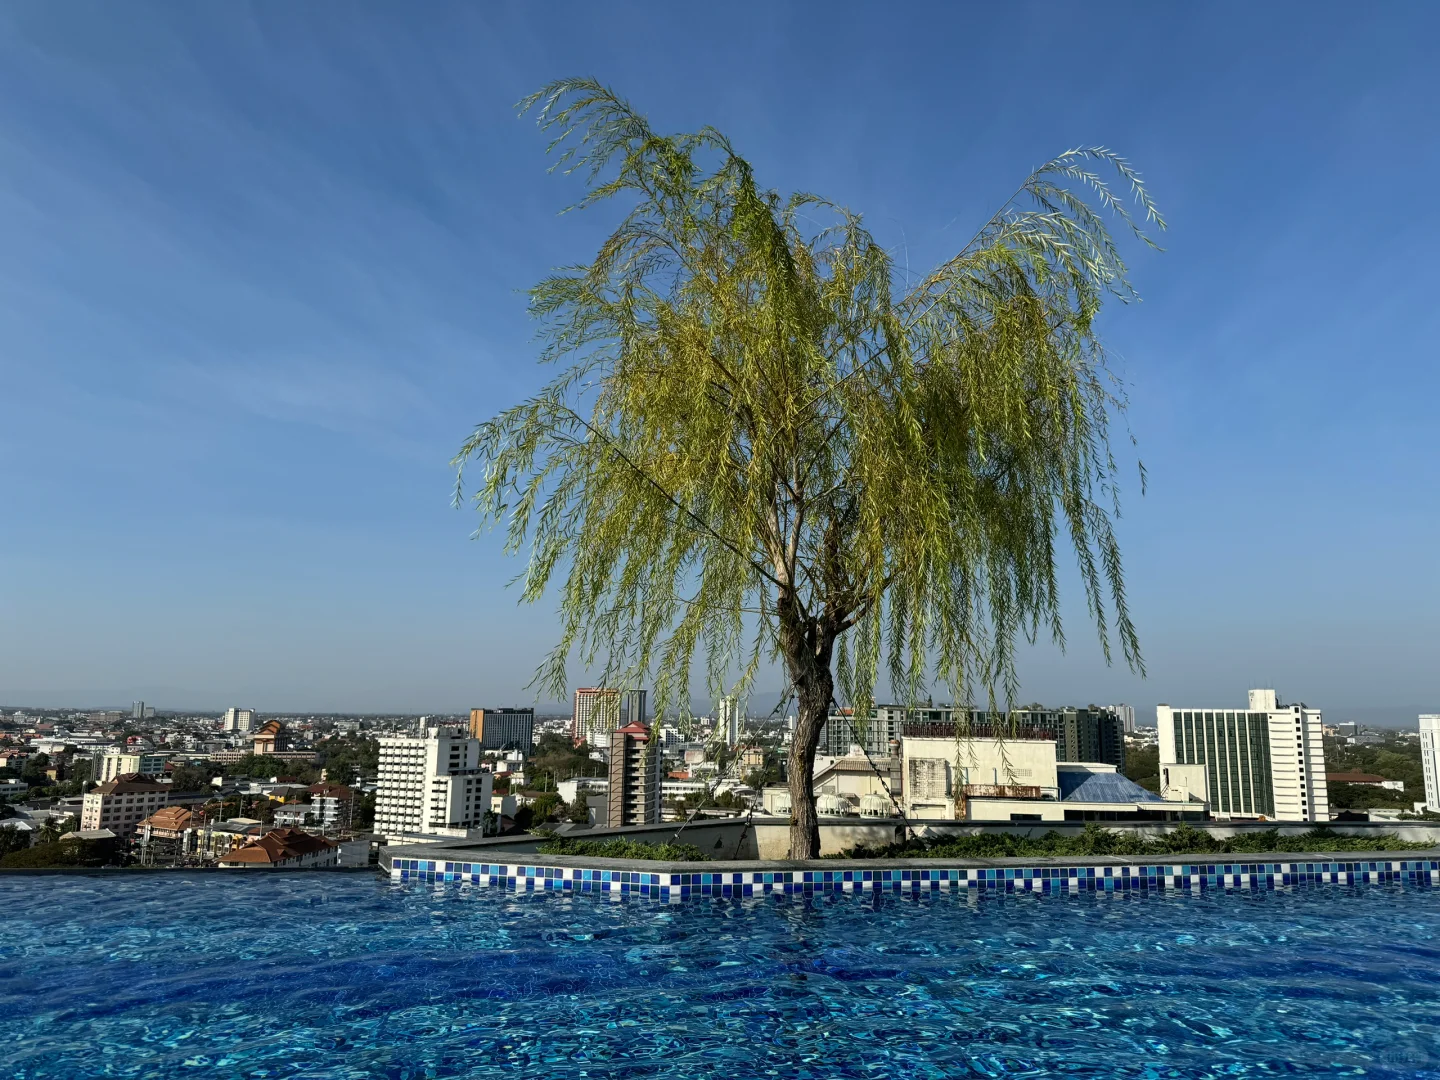 ChiangMai-Comparison of stay experience between Aksara Heritage hotel and The earth hotel